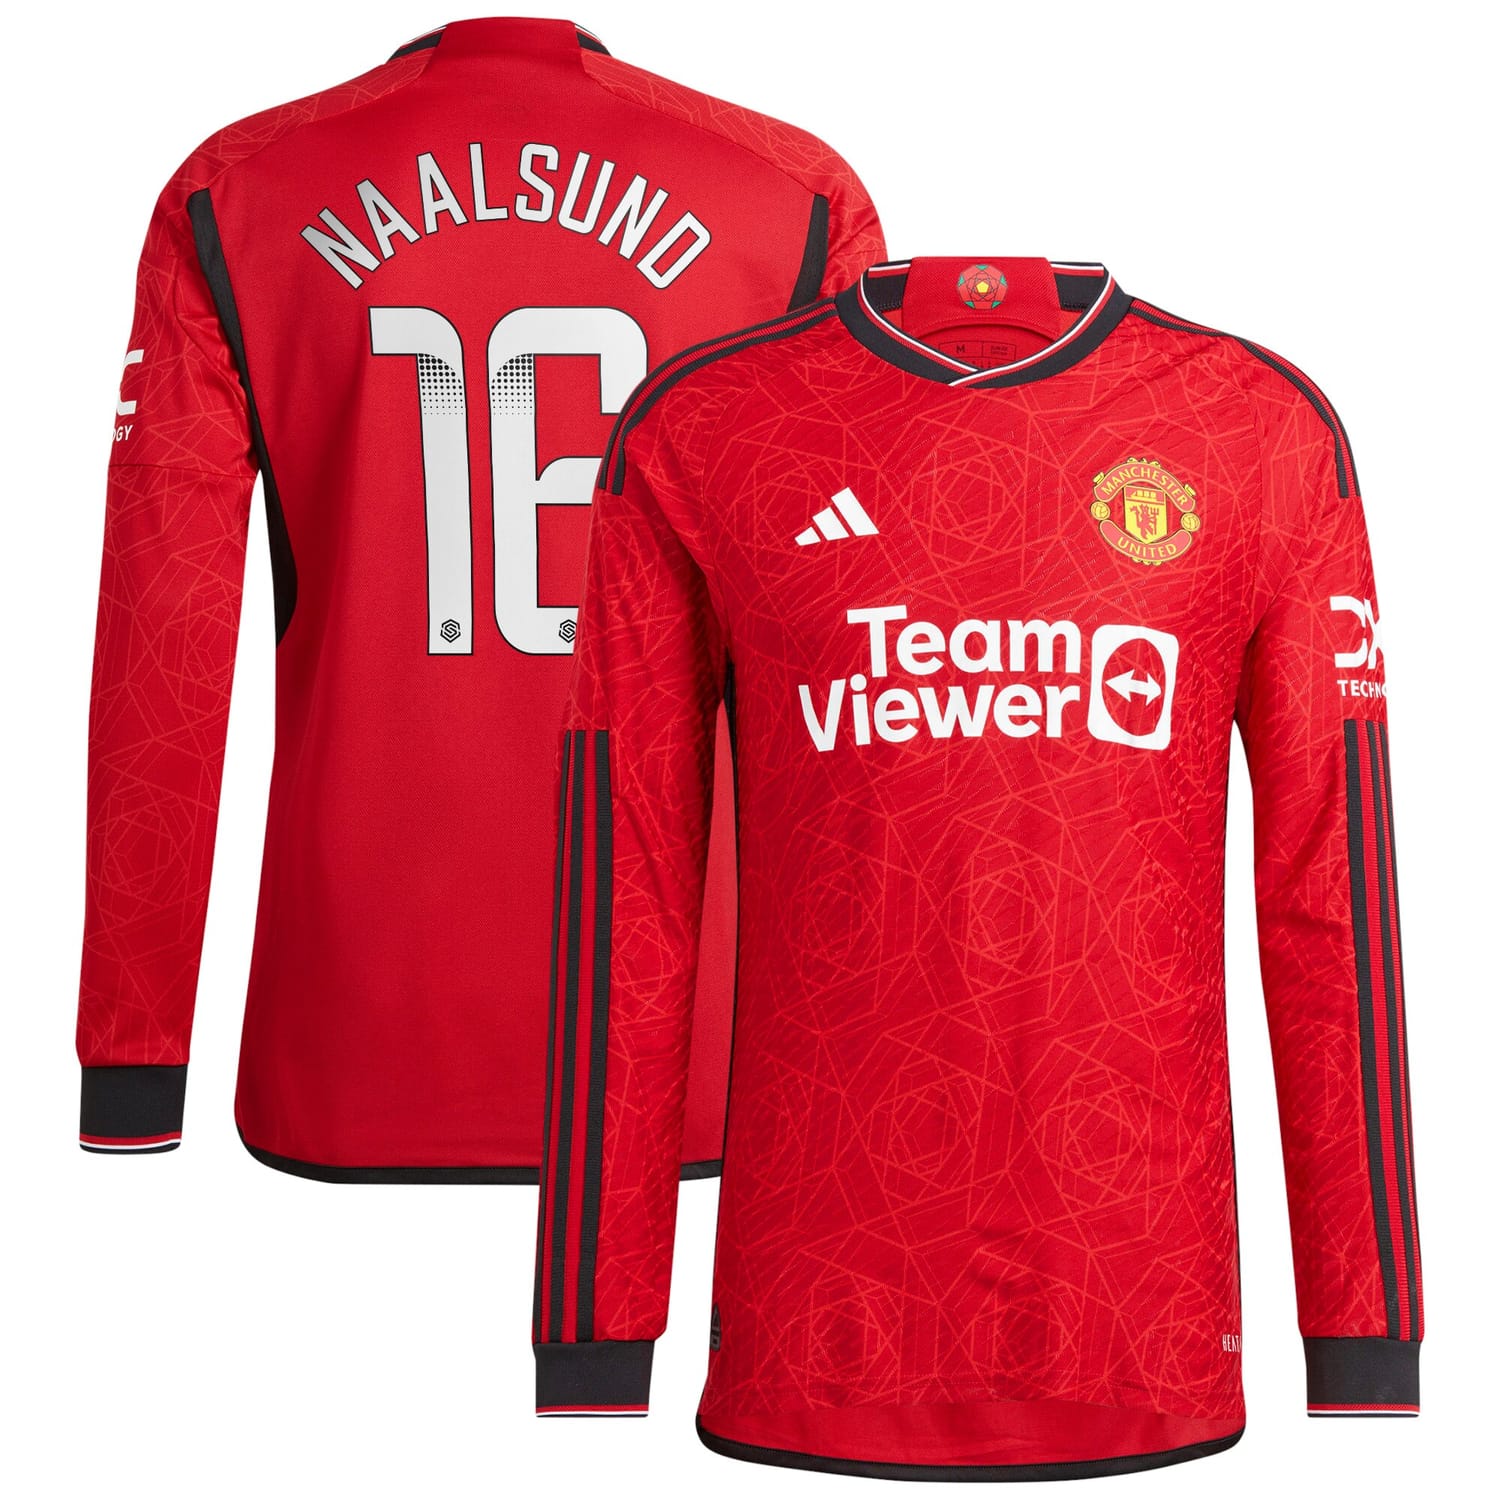 Premier League Manchester United Home WSL Authentic Jersey Shirt Long Sleeve 2023-24 player Lisa Naalsund 16 printing for Men